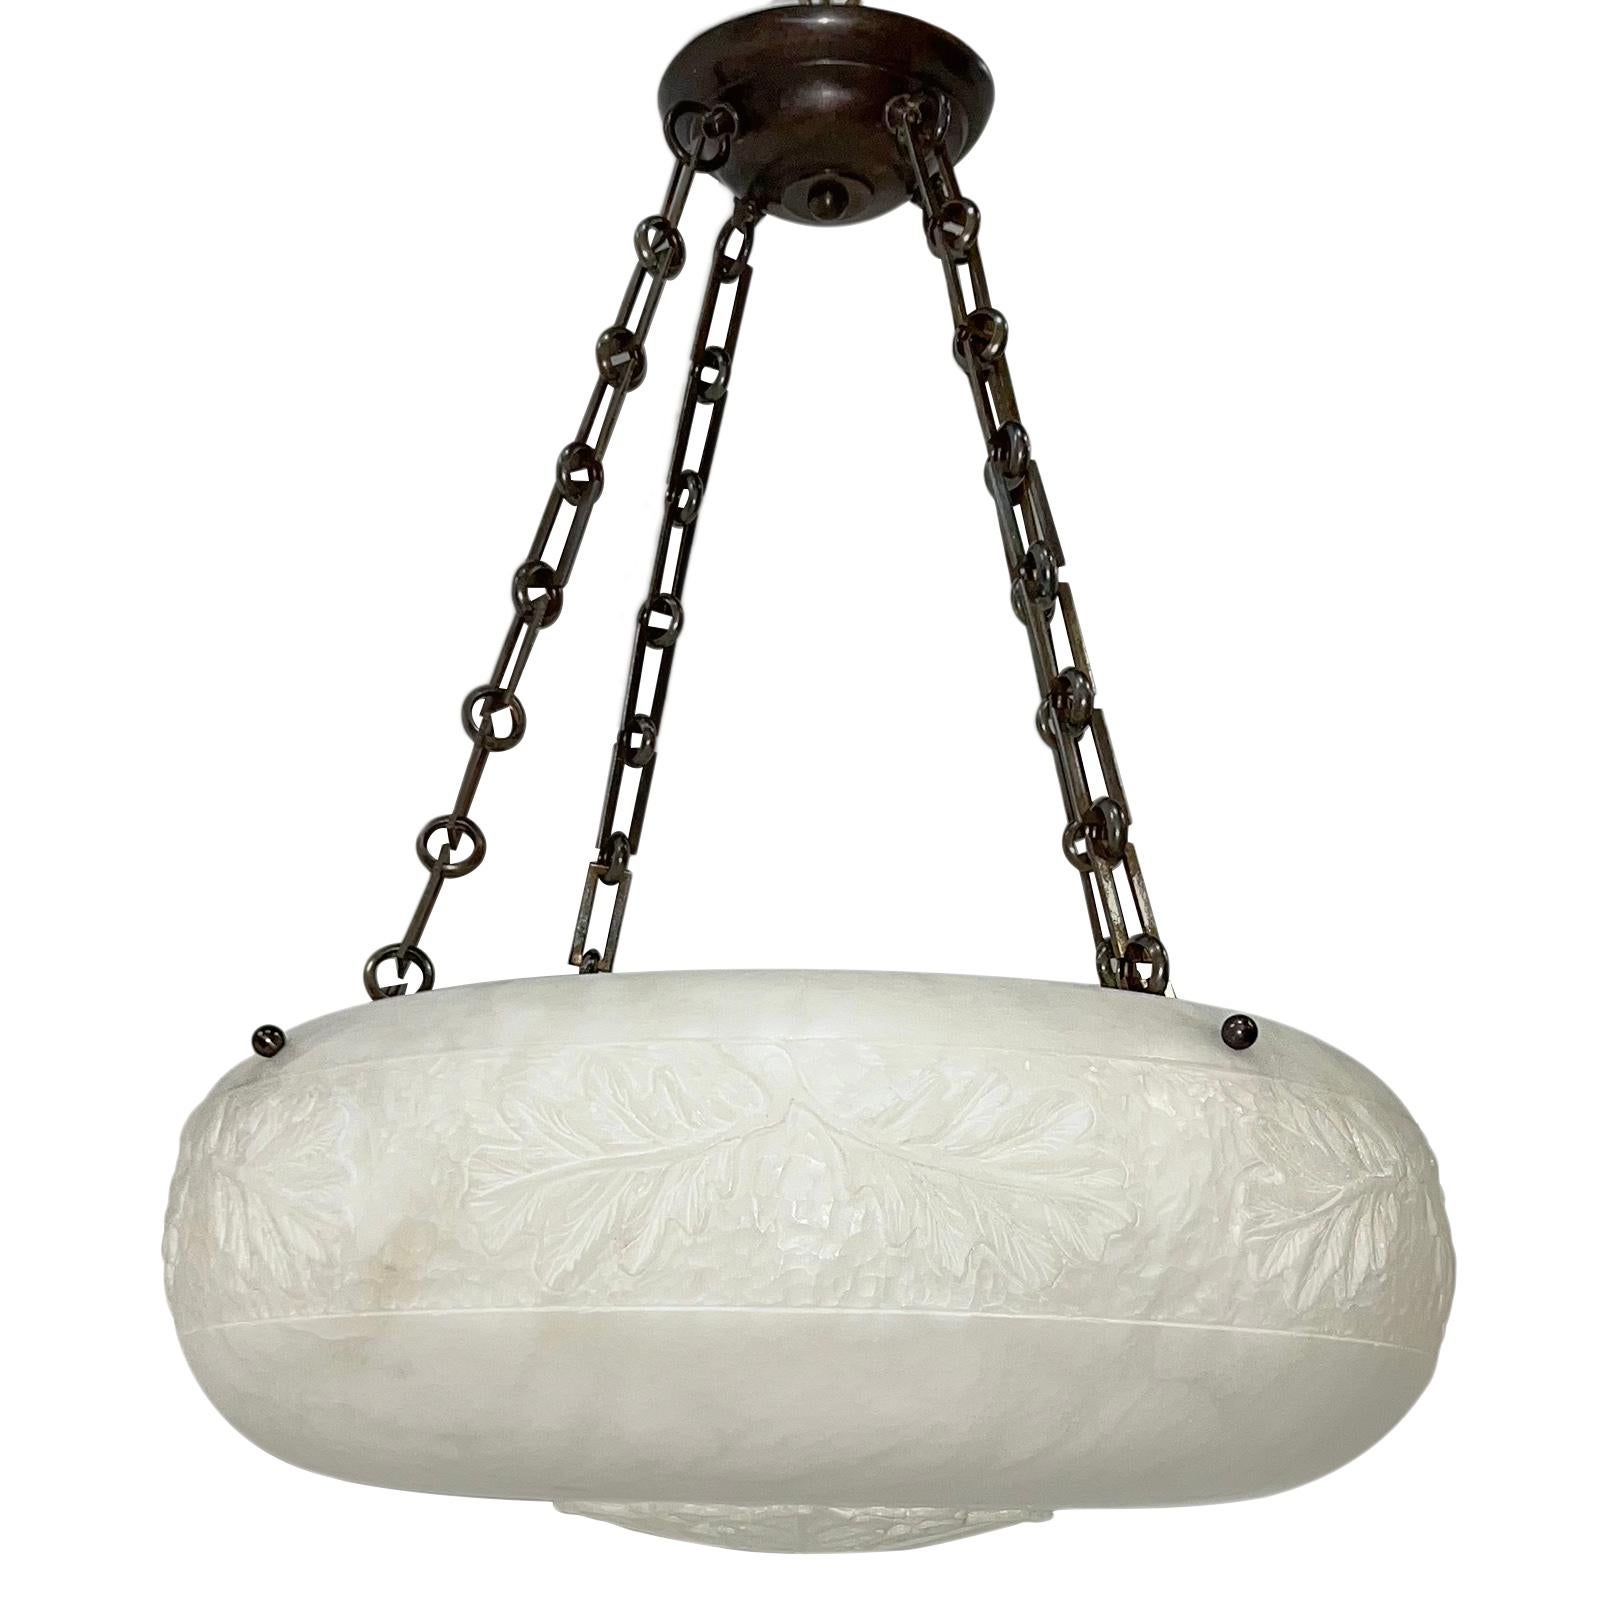 A circa 1940's French carved alabaster pendant light fixture with 4 interior lights.

Measurements:
Current drop: 26